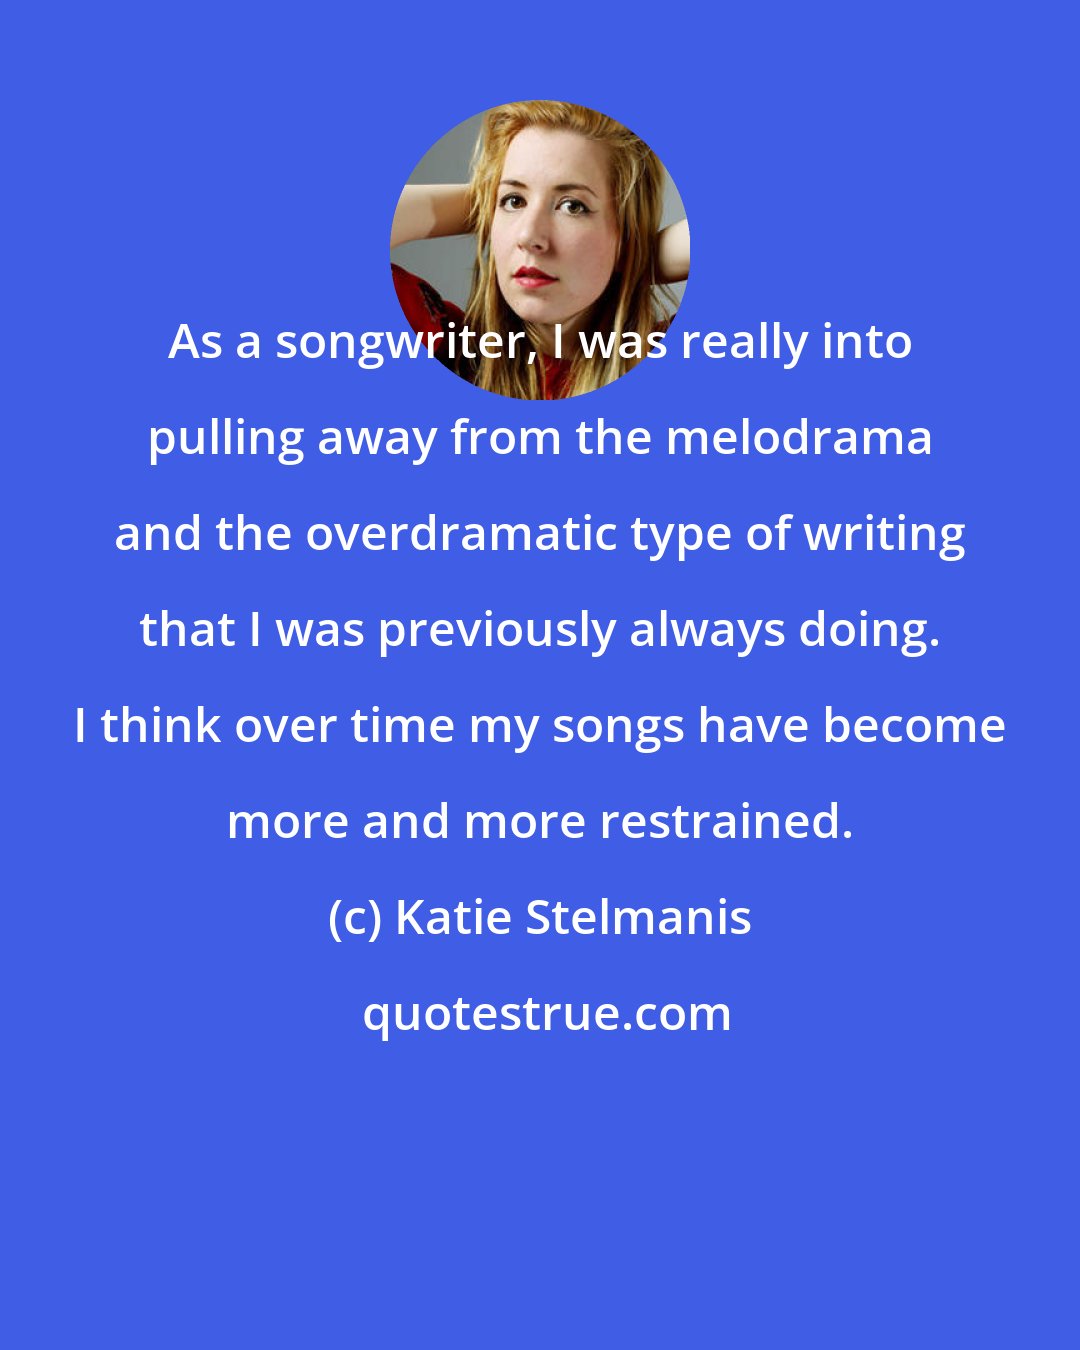 Katie Stelmanis: As a songwriter, I was really into pulling away from the melodrama and the overdramatic type of writing that I was previously always doing. I think over time my songs have become more and more restrained.